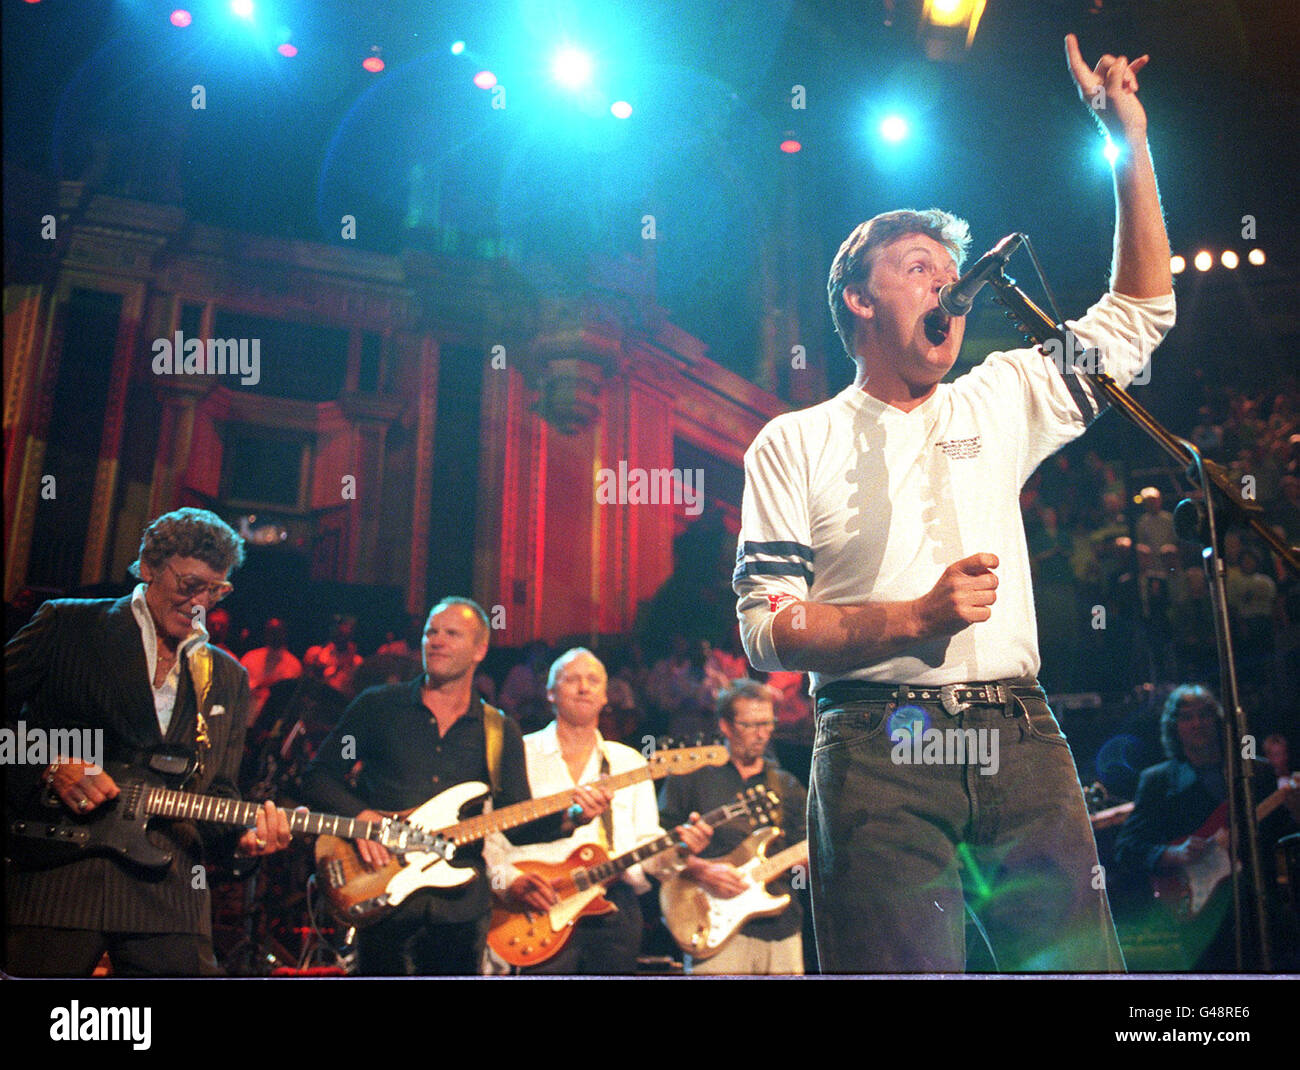 Carl Perkins, Sting, Mark Knopfler and Eric Clapton paly guitar while Sir Paul McCartney sings during the finale of the Music for Montserrat benefit concert at the Royal Albert Hall tonight (Monday). Photo by Rebecca Naden/PA. See PA story SHOWBIZ Montserrat Stock Photo